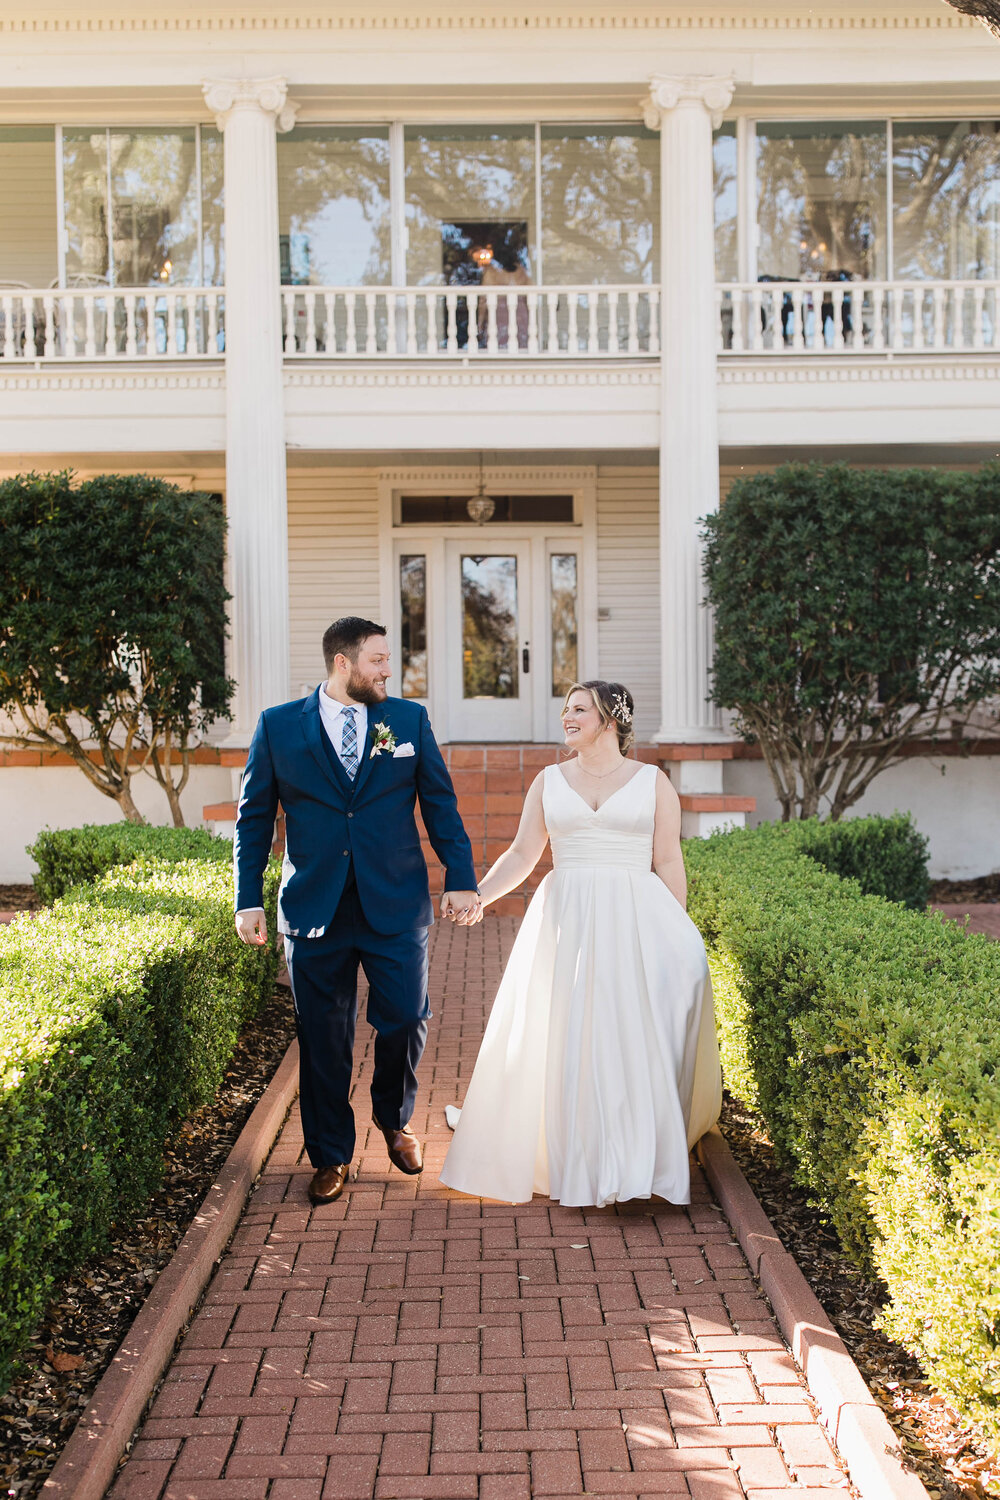 Caitlin Nash and Kyle 's Wedding Website - The Knot